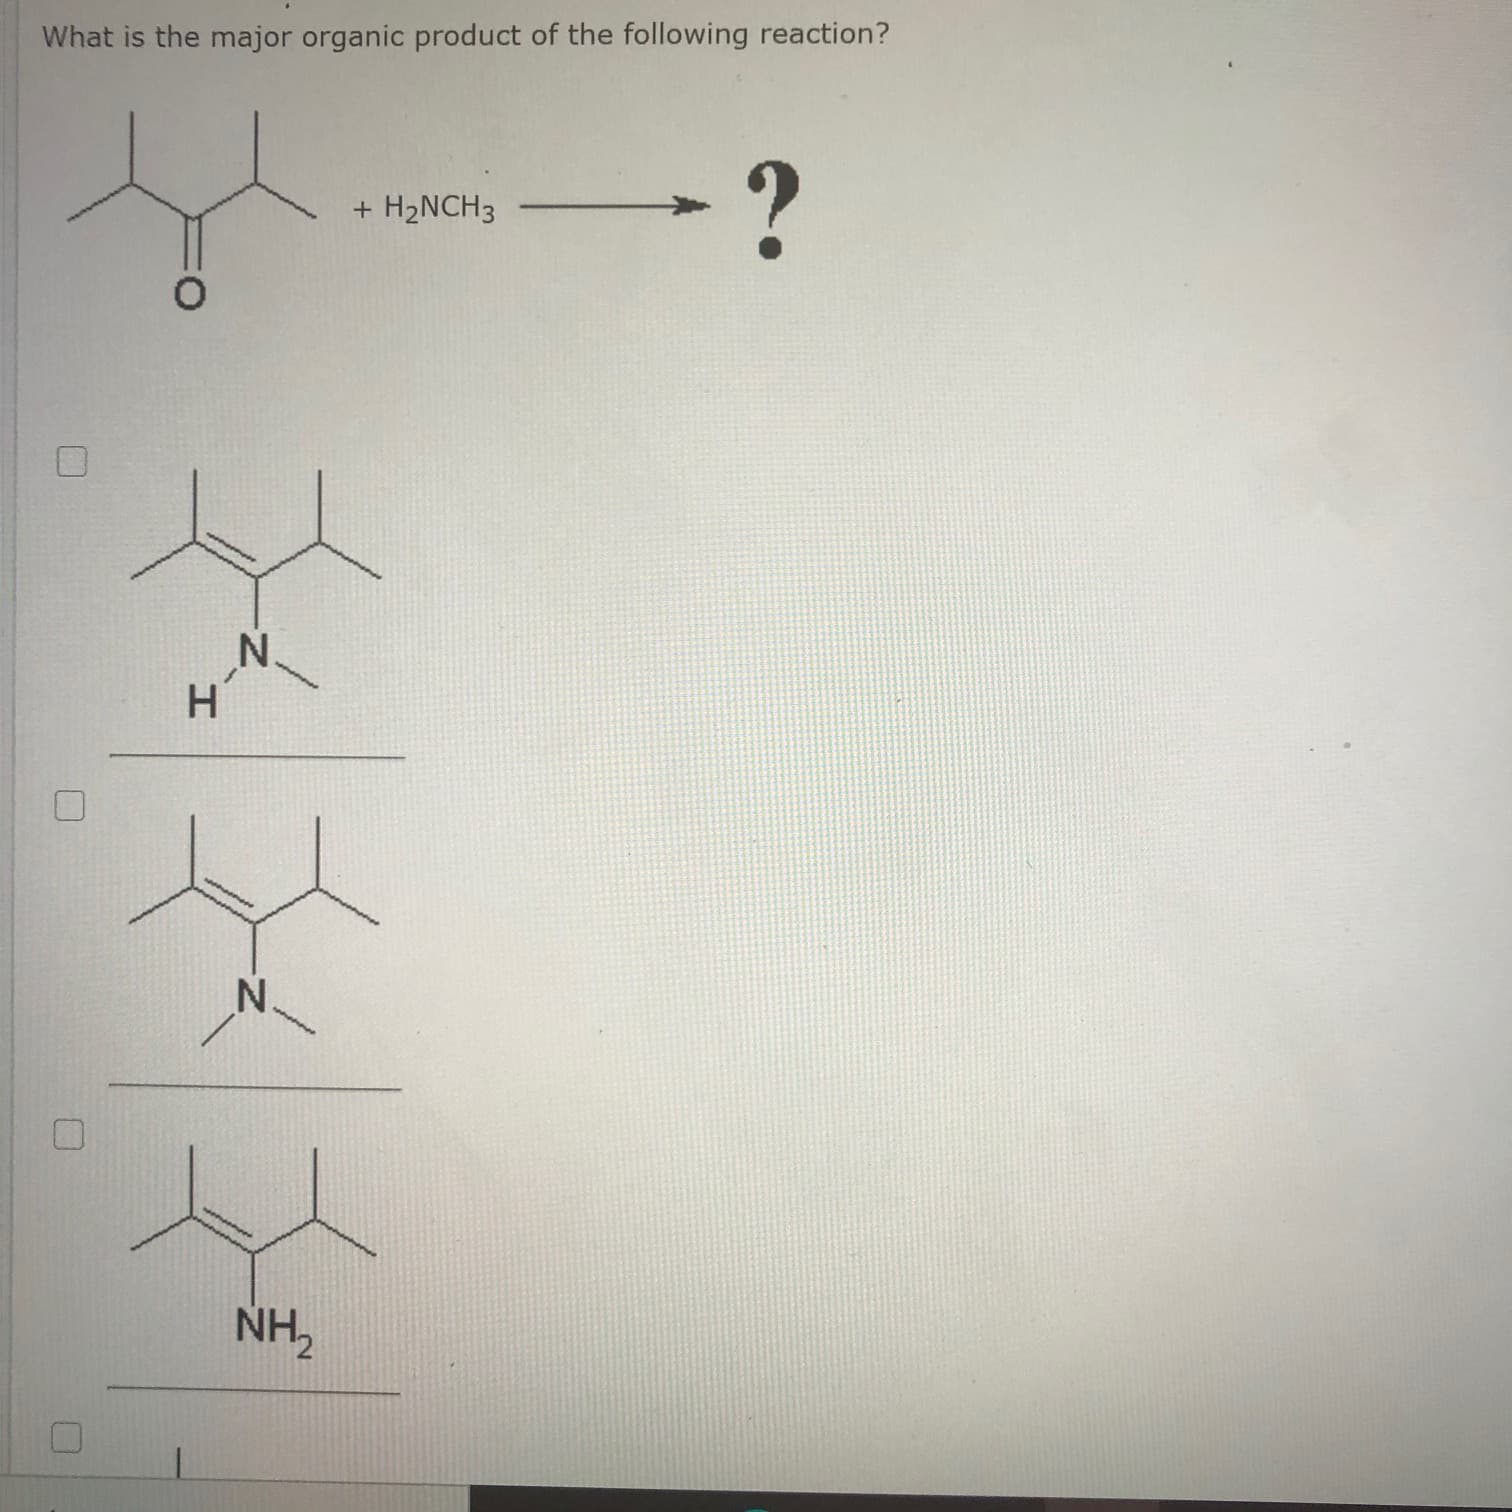 What is the major organic product of the following reaction?
+ H2NCH3
